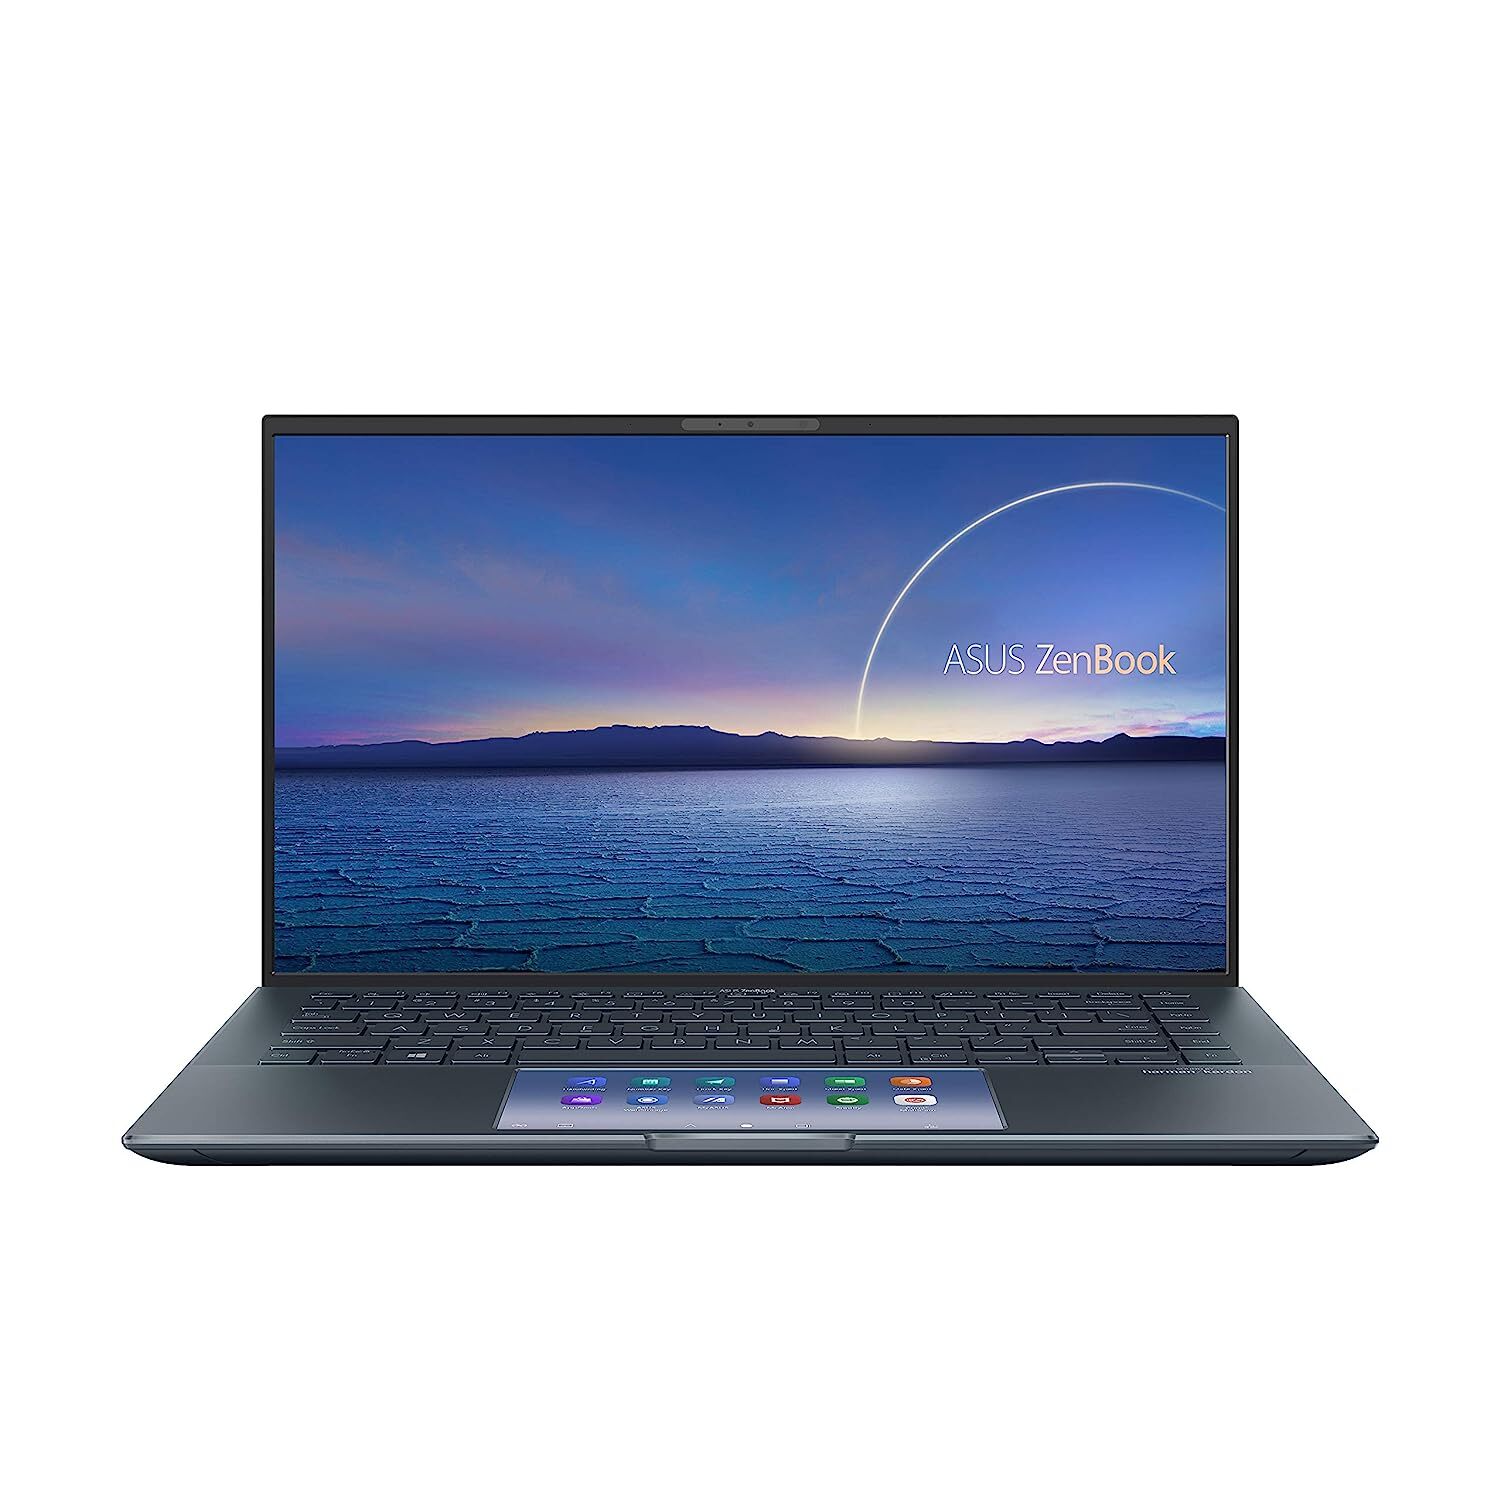 ASUS ZenBook 14e (2021) Intel Core i5-1135G7 11th Gen 14.0 inches FHD, 8GB/512GB SSD/Office 2019/Windows 10/2GB NVIDIA MX450 Graphics Thin and Light Business Laptop (Grey/1.29 kg), UX435EG-AI501TS